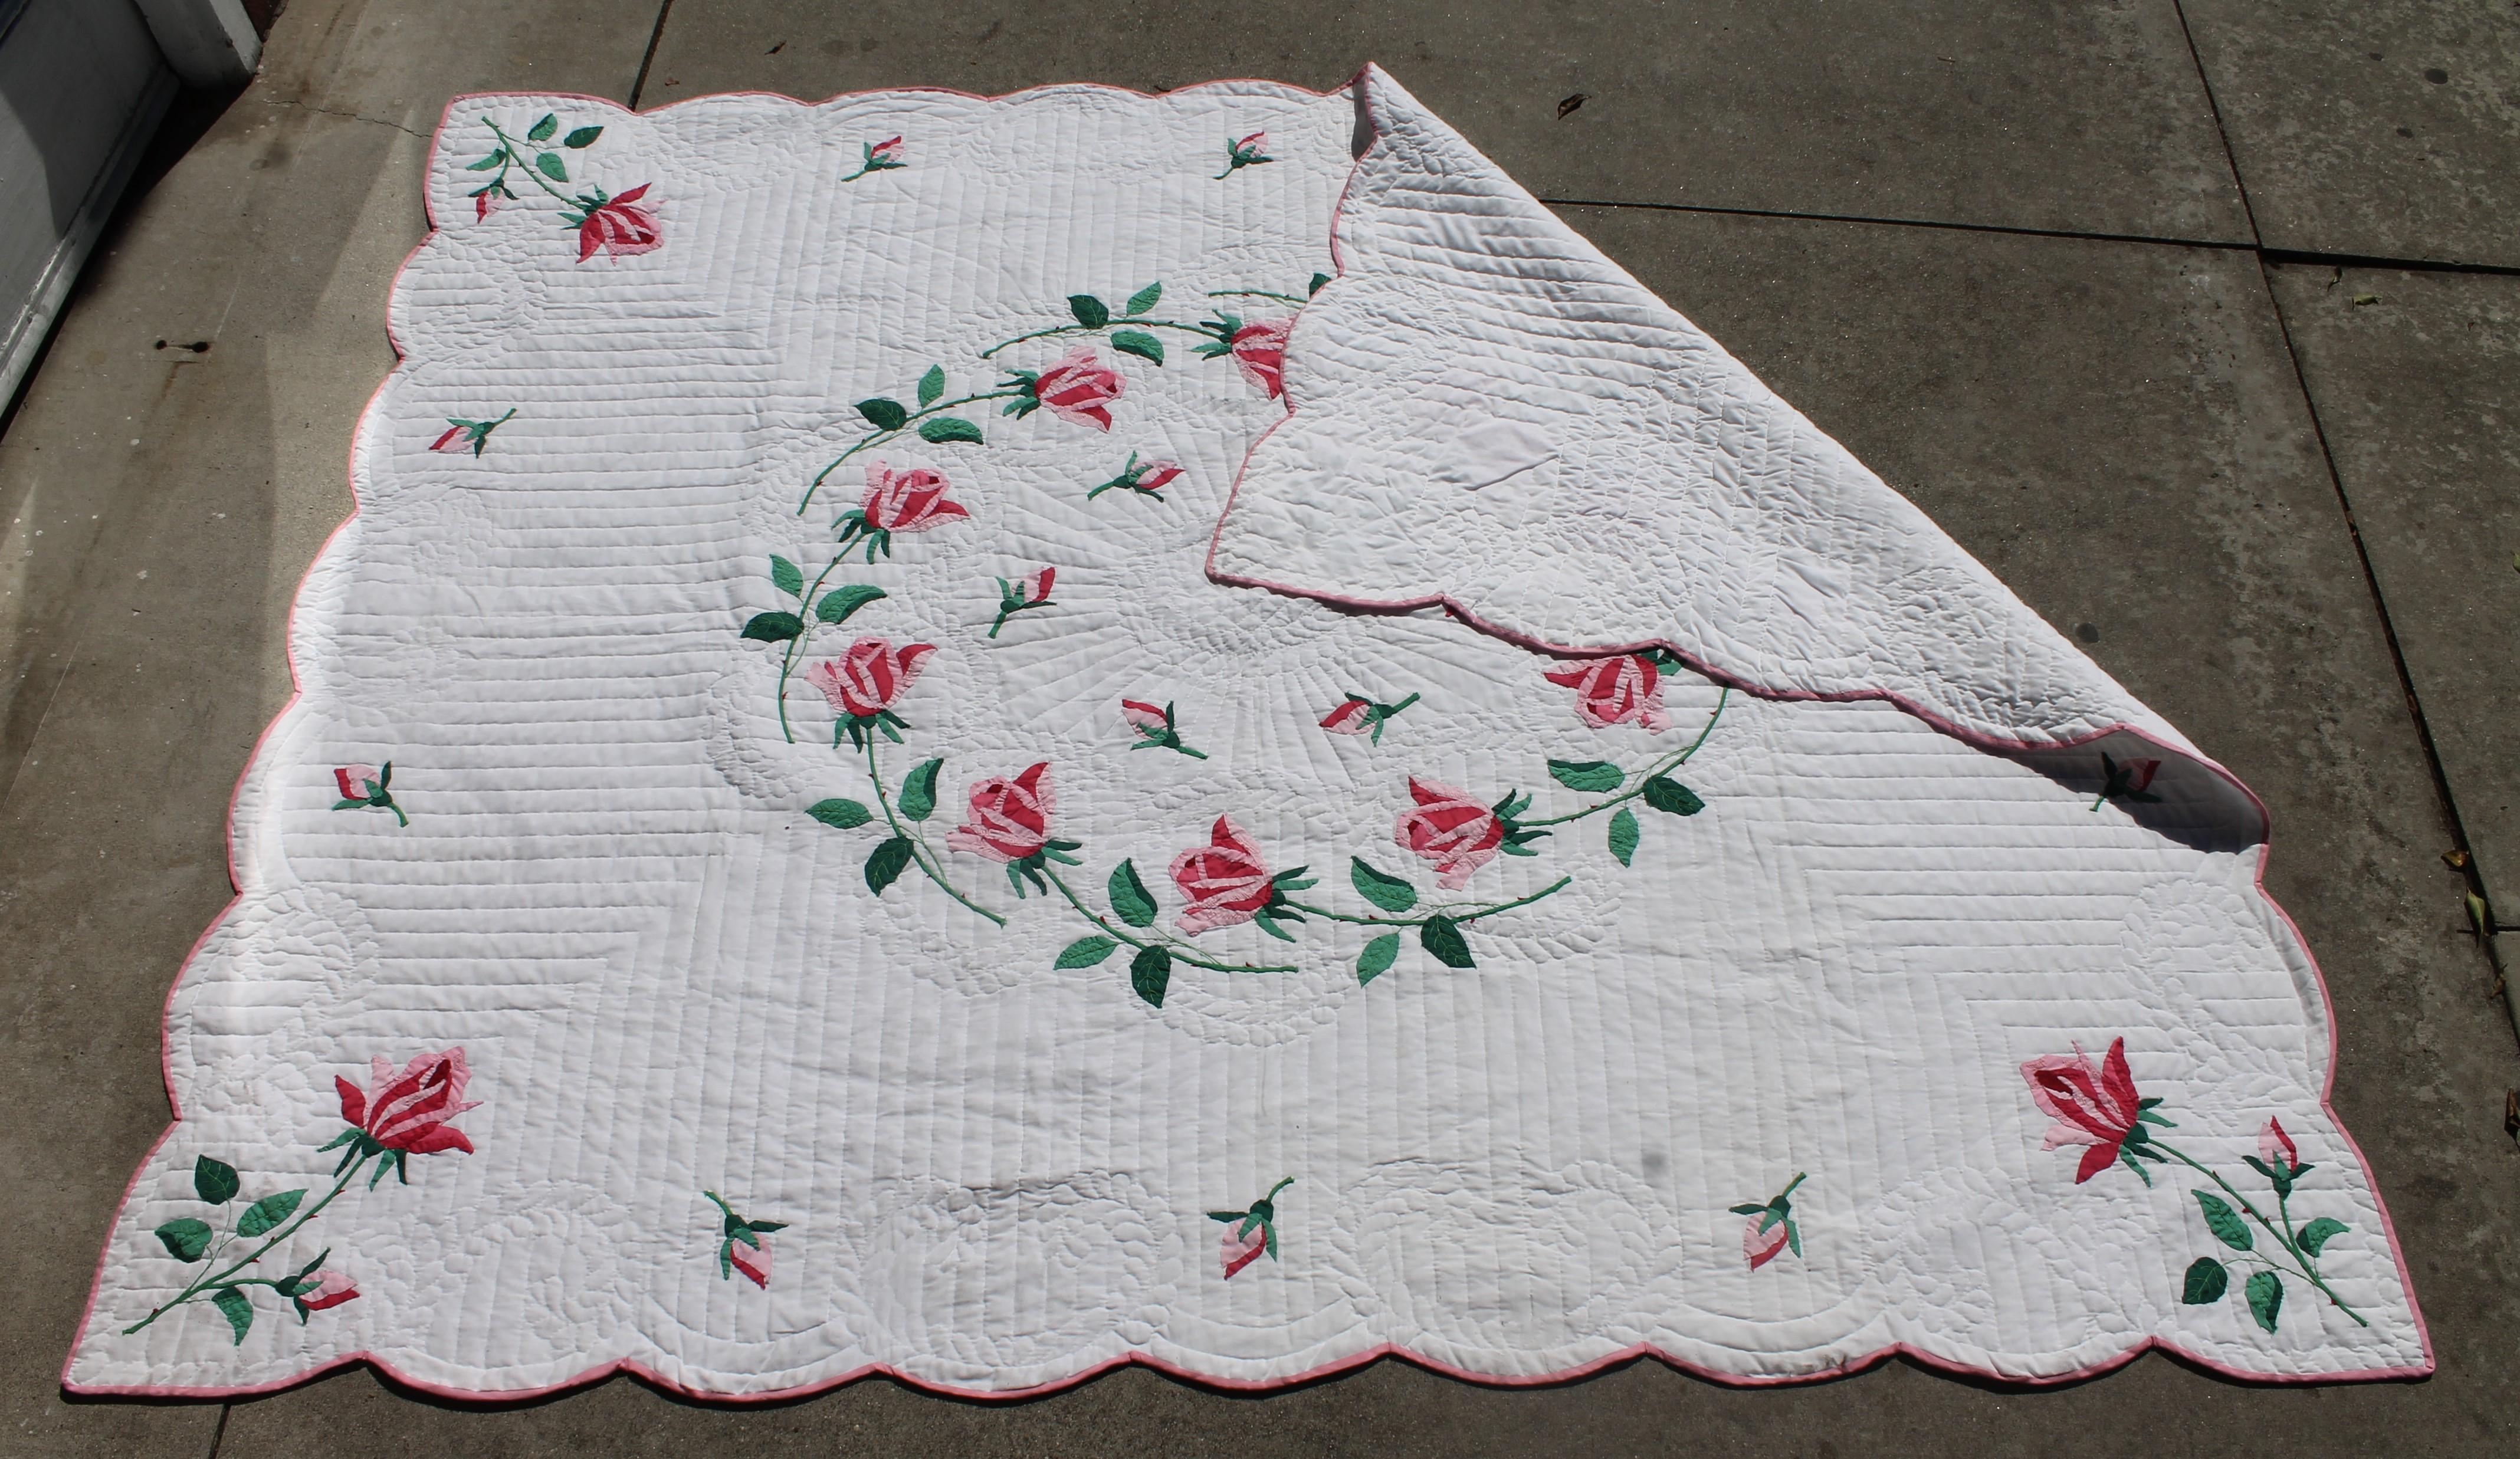 Beautiful handmade rose applique quilt in amazing condition. Stellar pattern and great stitching The binding is in great condition. Professionally cleaned.